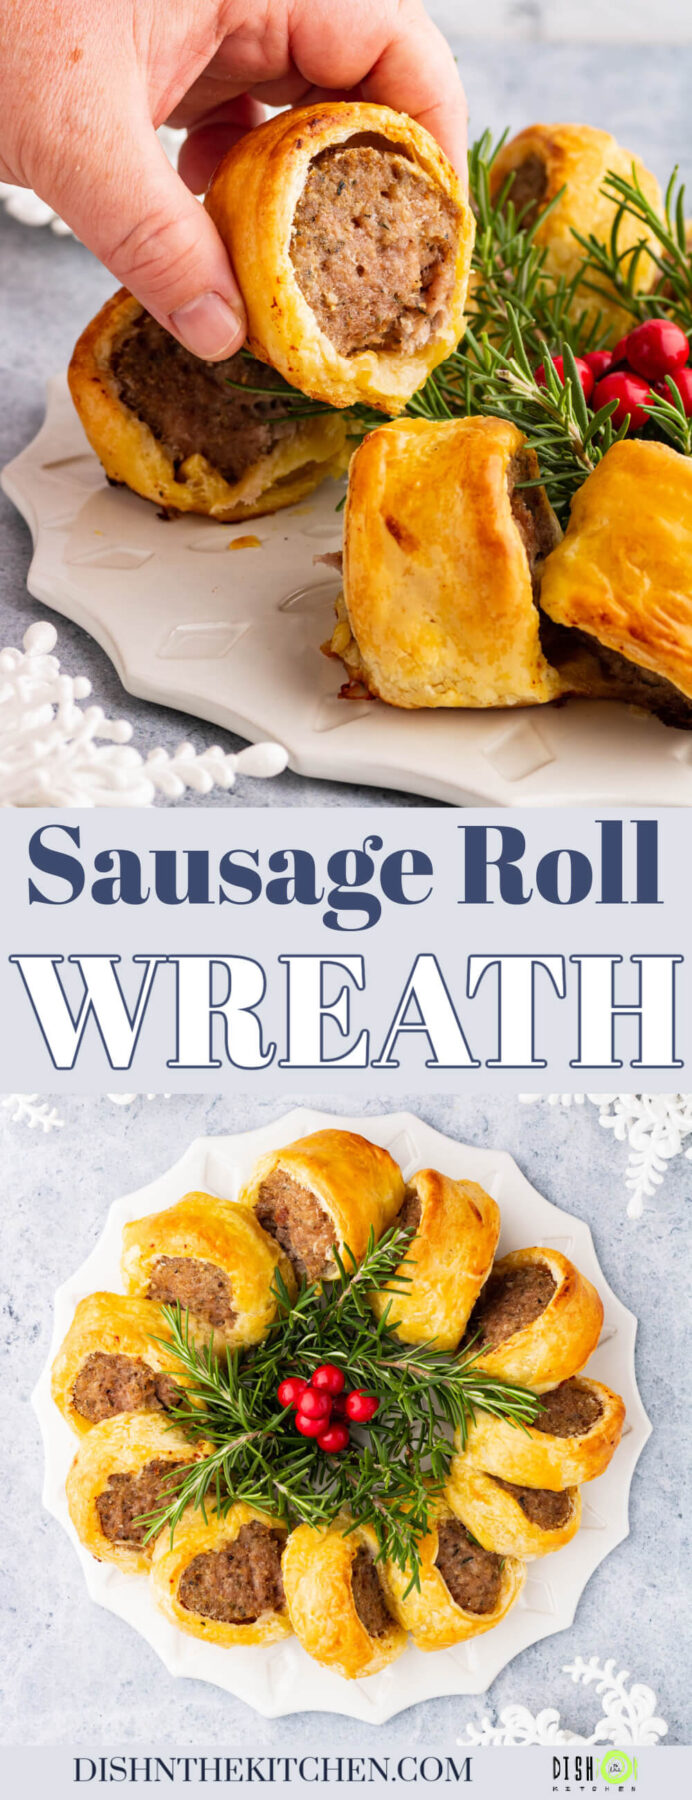 Pinterest image of a baked sausage roll wreath decorated with rosemary and cranberries.